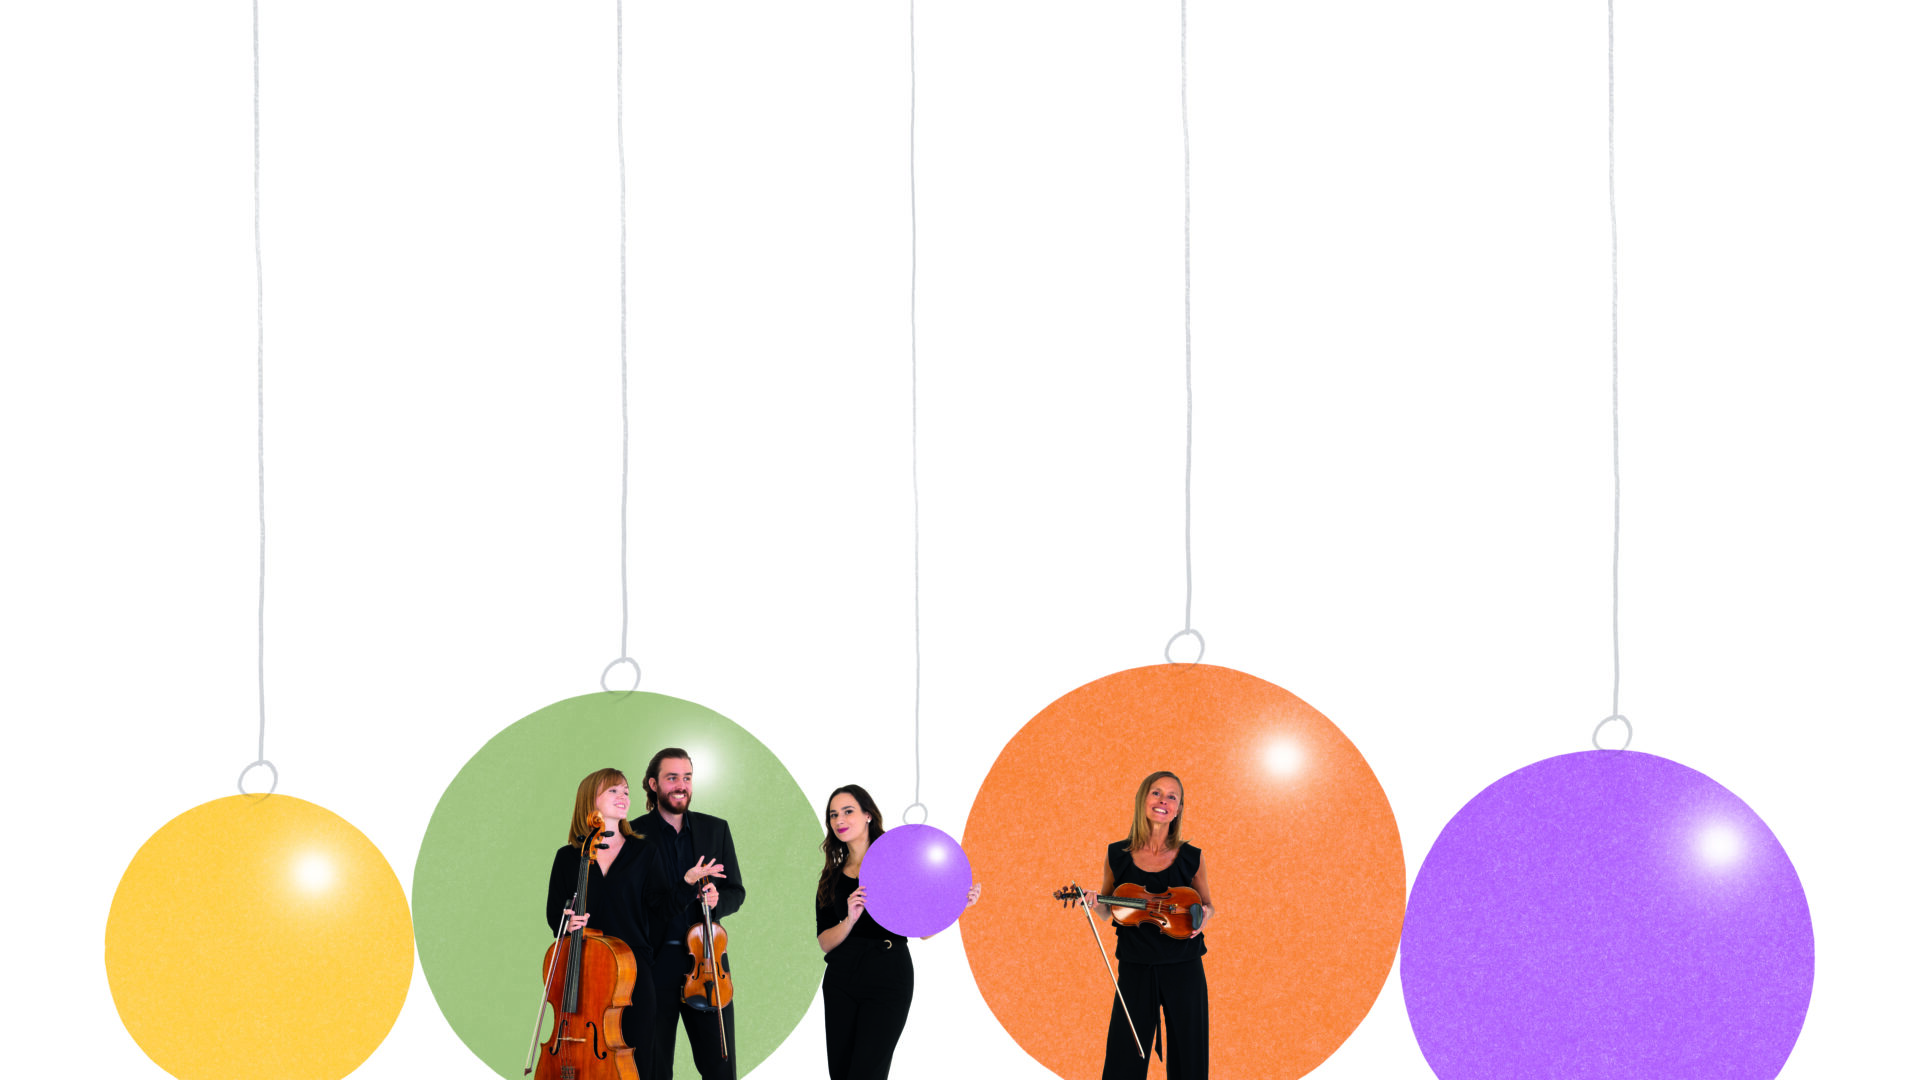 4 BSO Musicians standing in front of 4 giant Christmas baubles, one musician is holding a cello, another is holding a viola and another is holding a violin